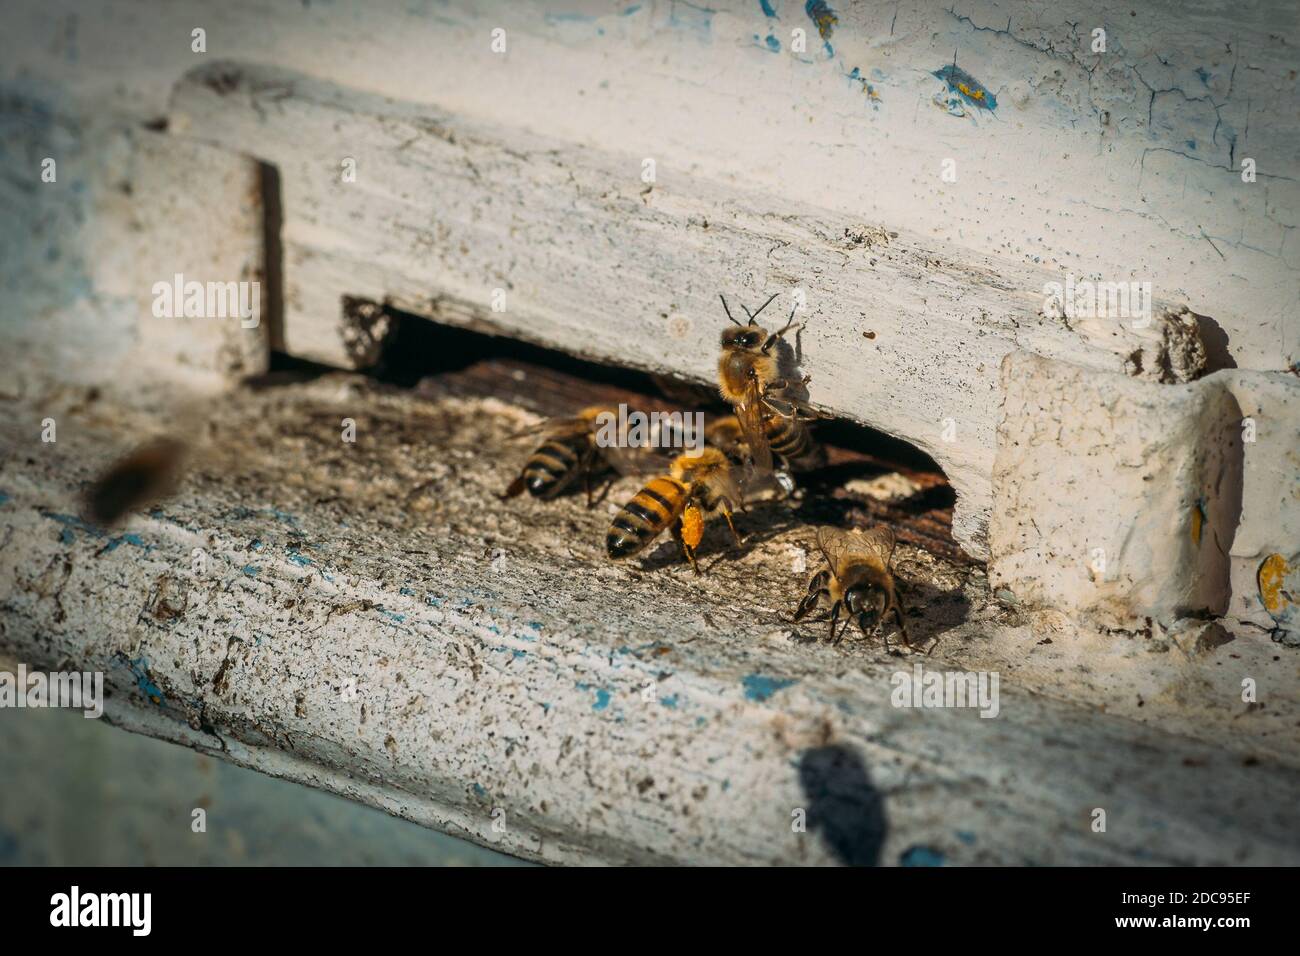 Bees fly and out at beehive in November month, global warming, climate change, macro shot close up. Honey bees on home apiary, apiculture concept. Stock Photo